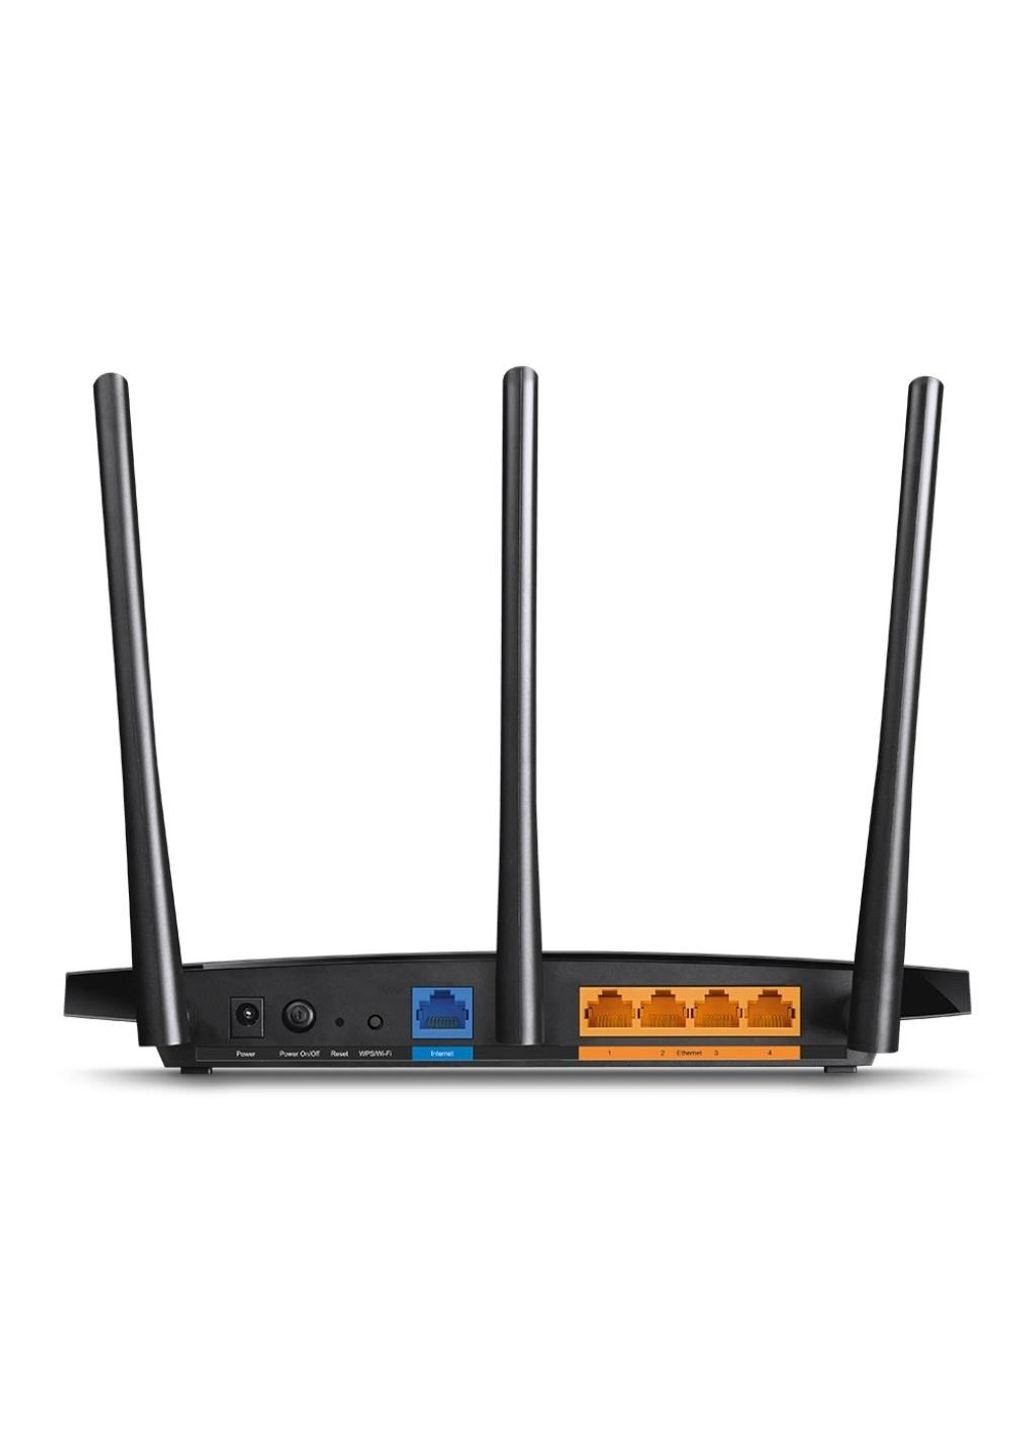 Маршрутизатор ARCHER-A8 TP-Link (250095387)